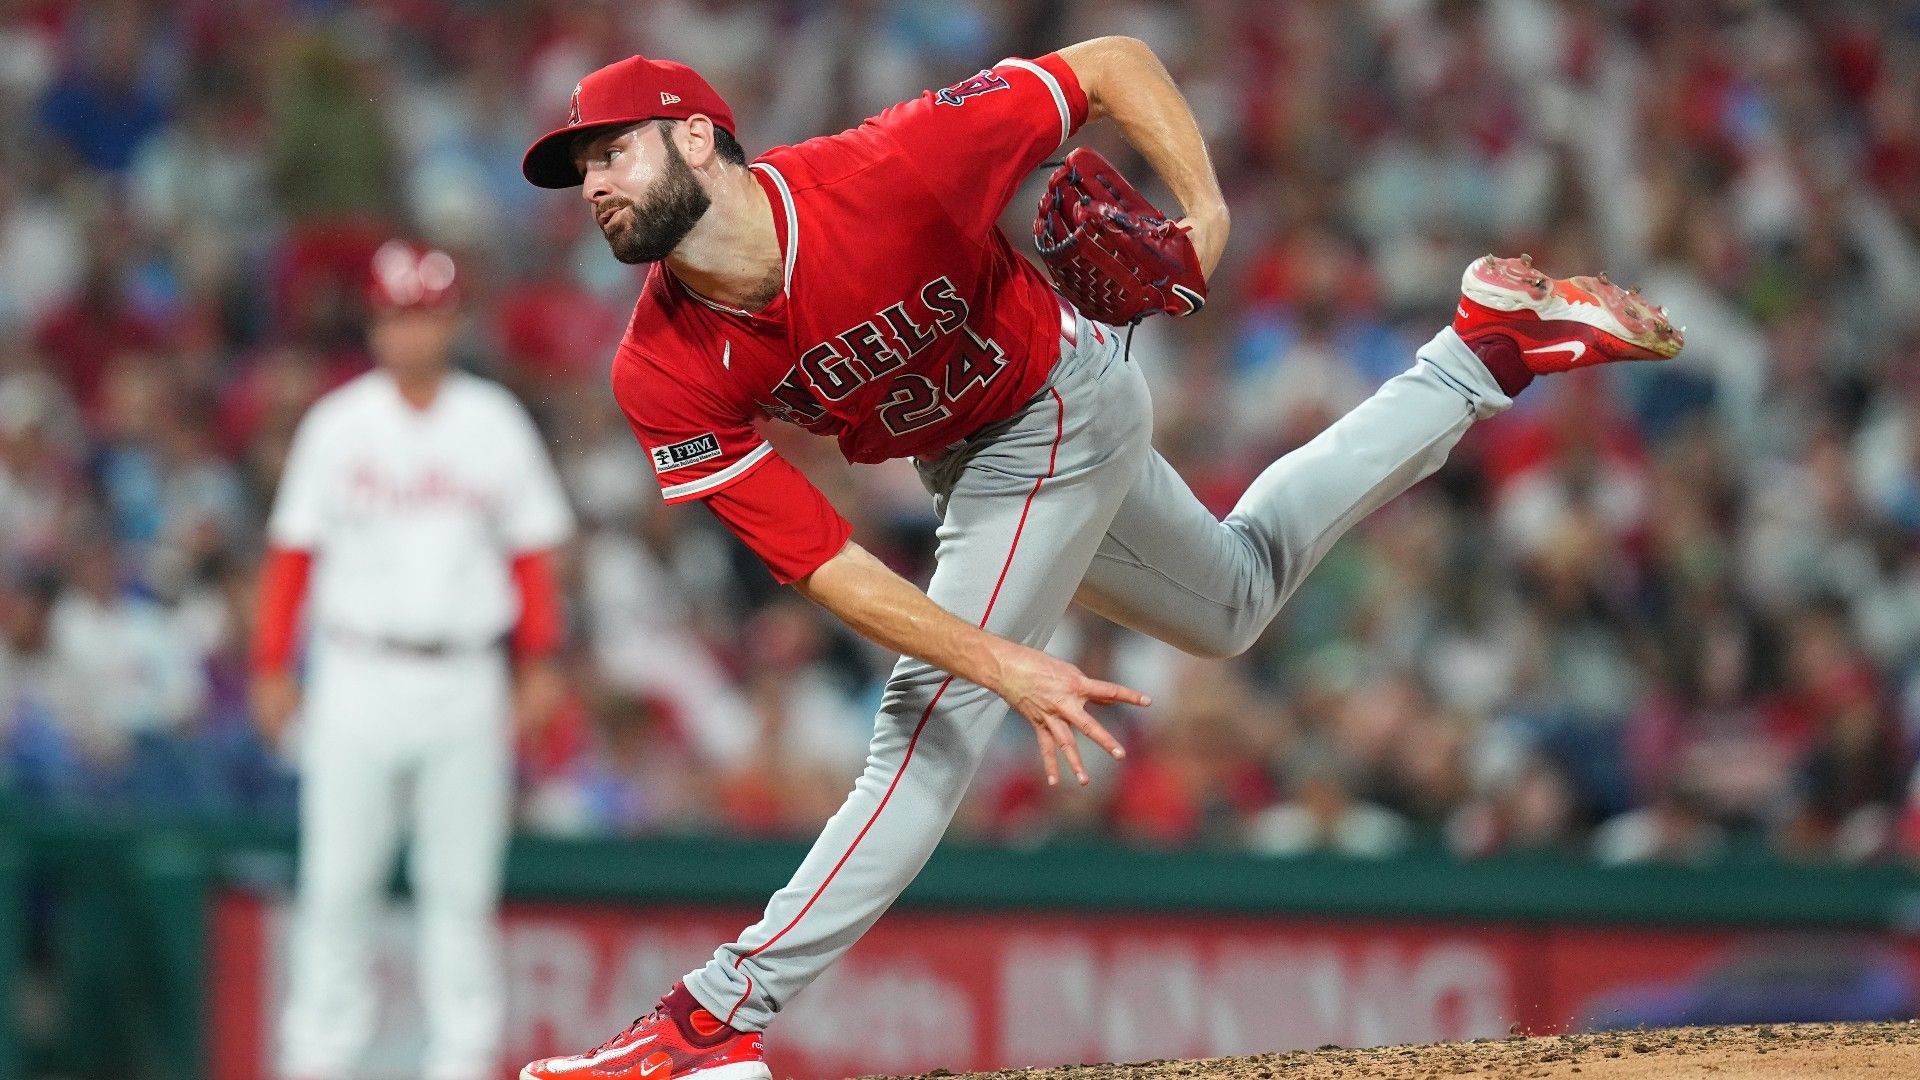 Guardians acquire Giolito from Angels through waiver claim